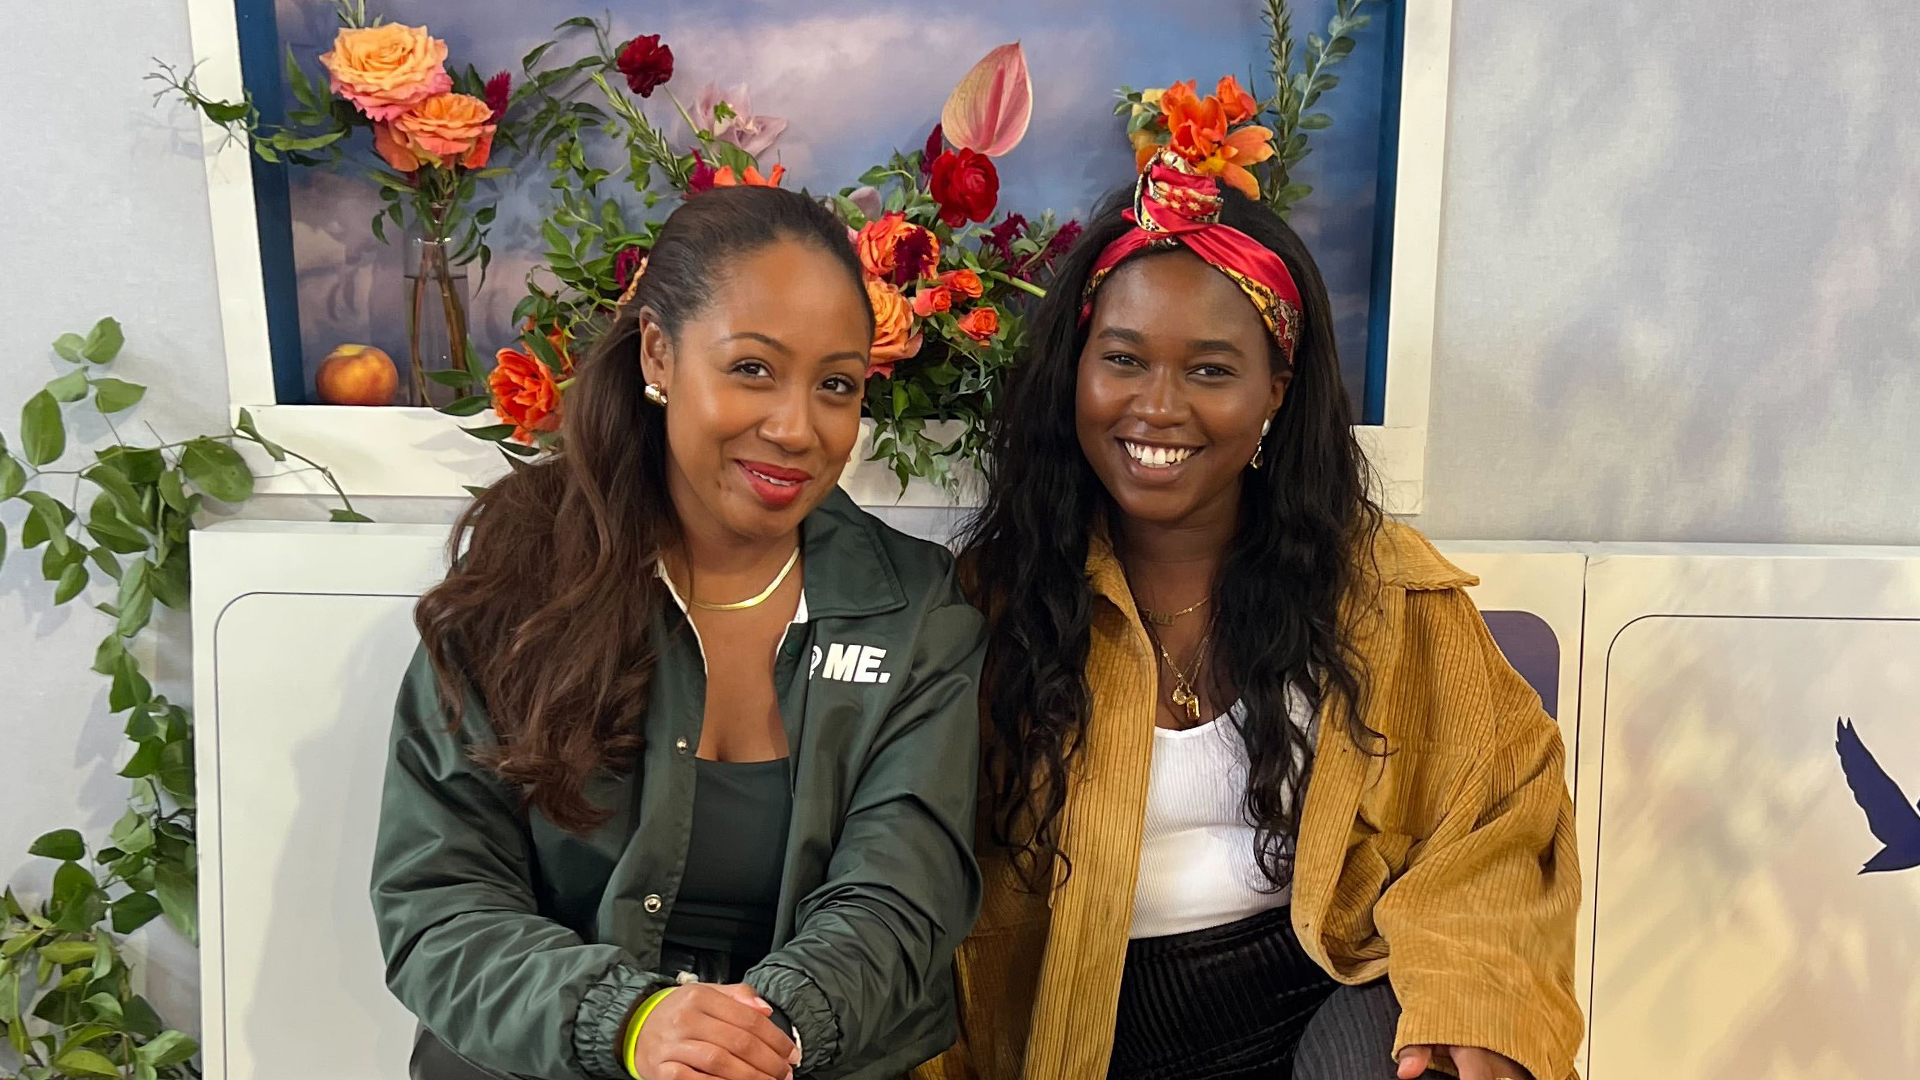 UpHouse team members Erica and Sade smiling in front of some flowers at CultureCon 2022